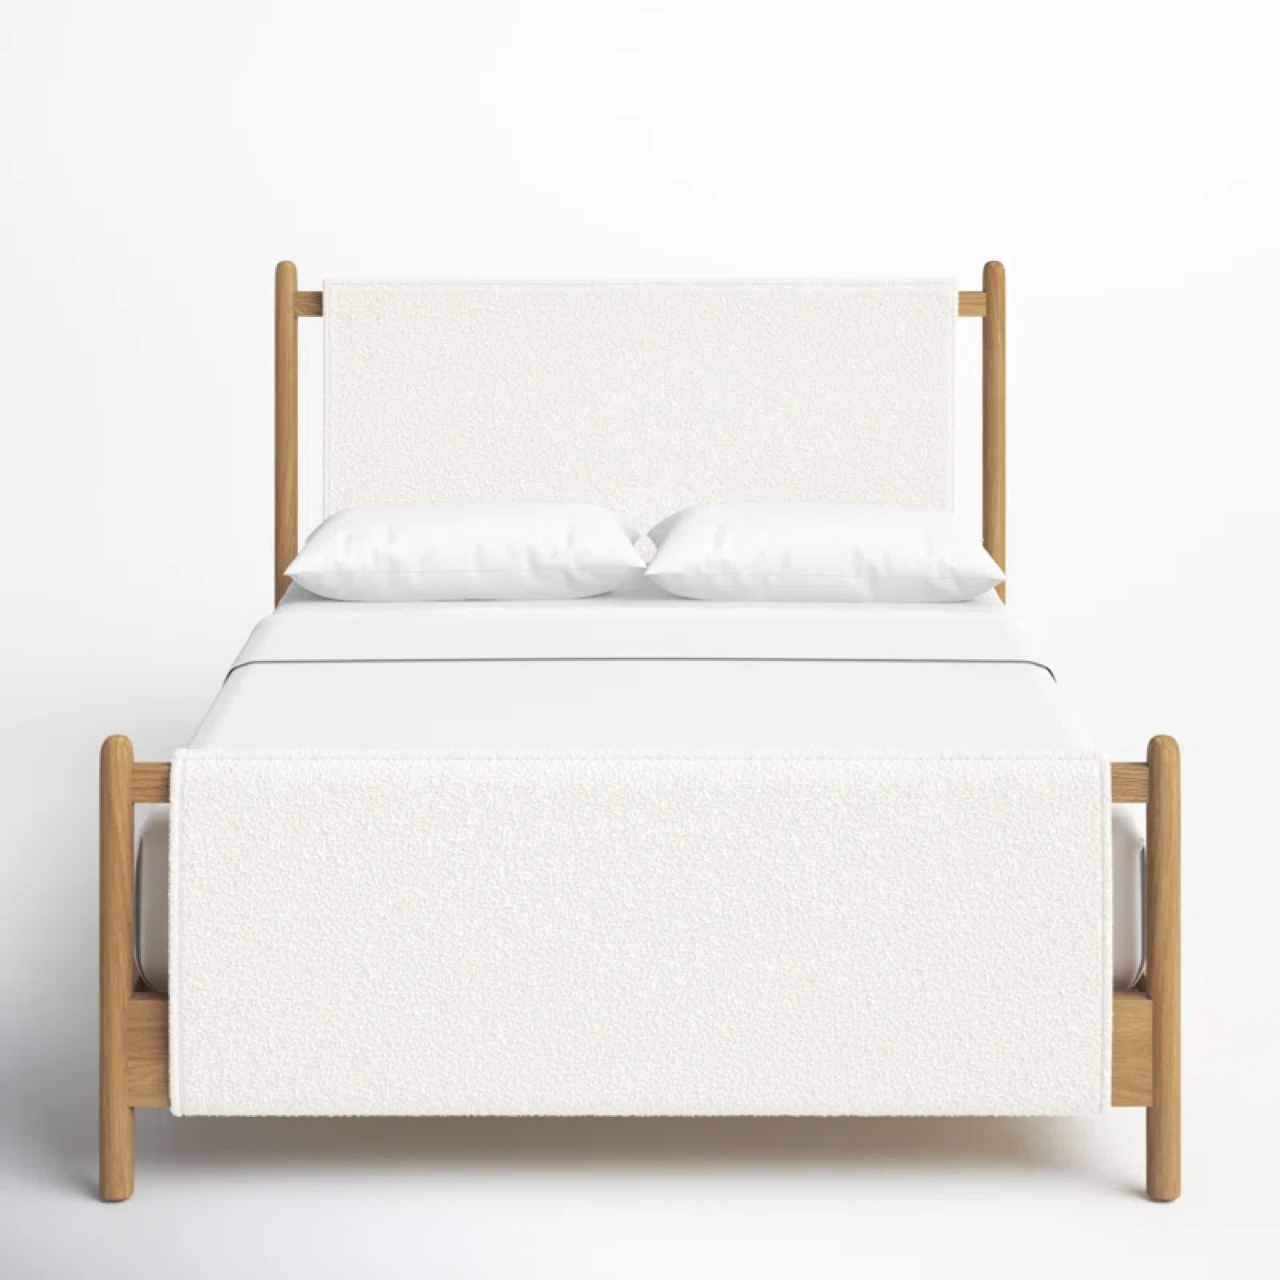 Beds, Now on Sale